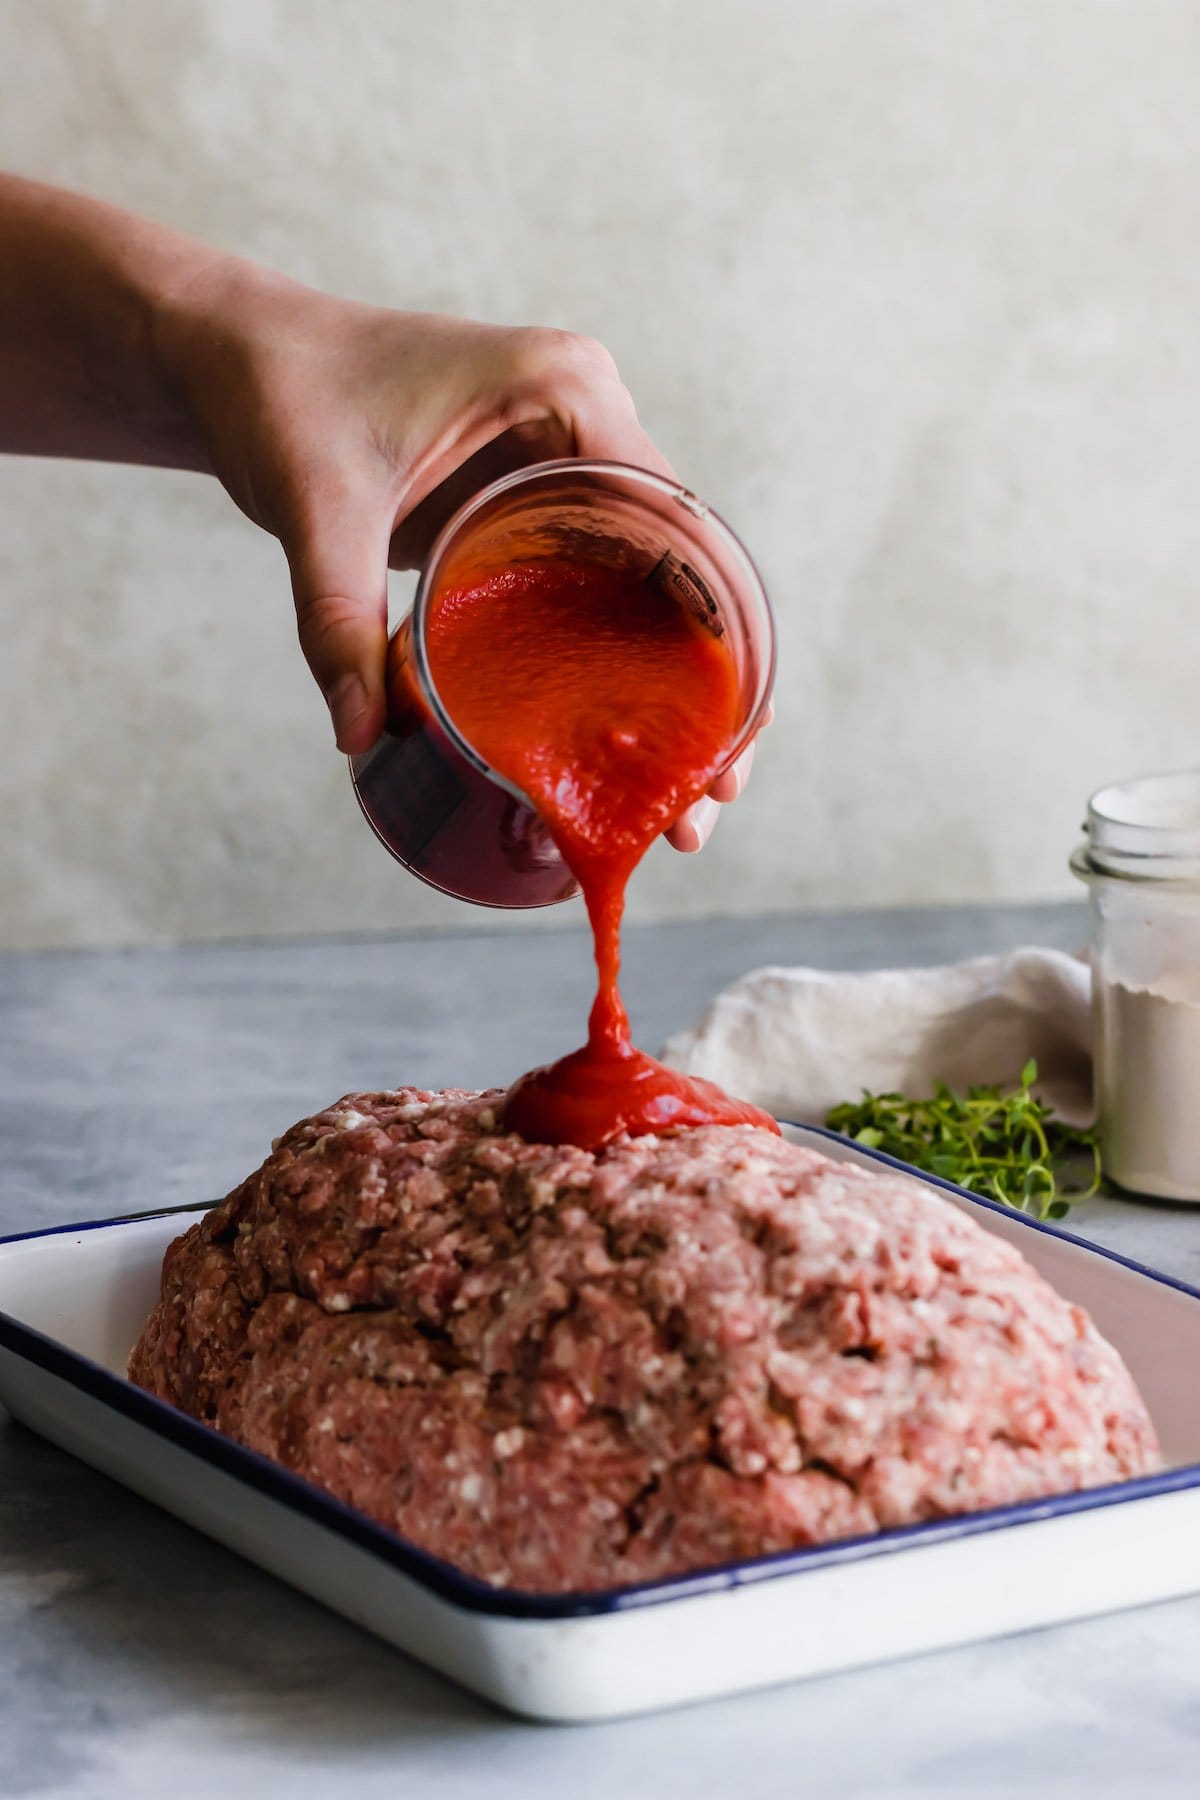 Meatloaf with sauce being poured on top of it.